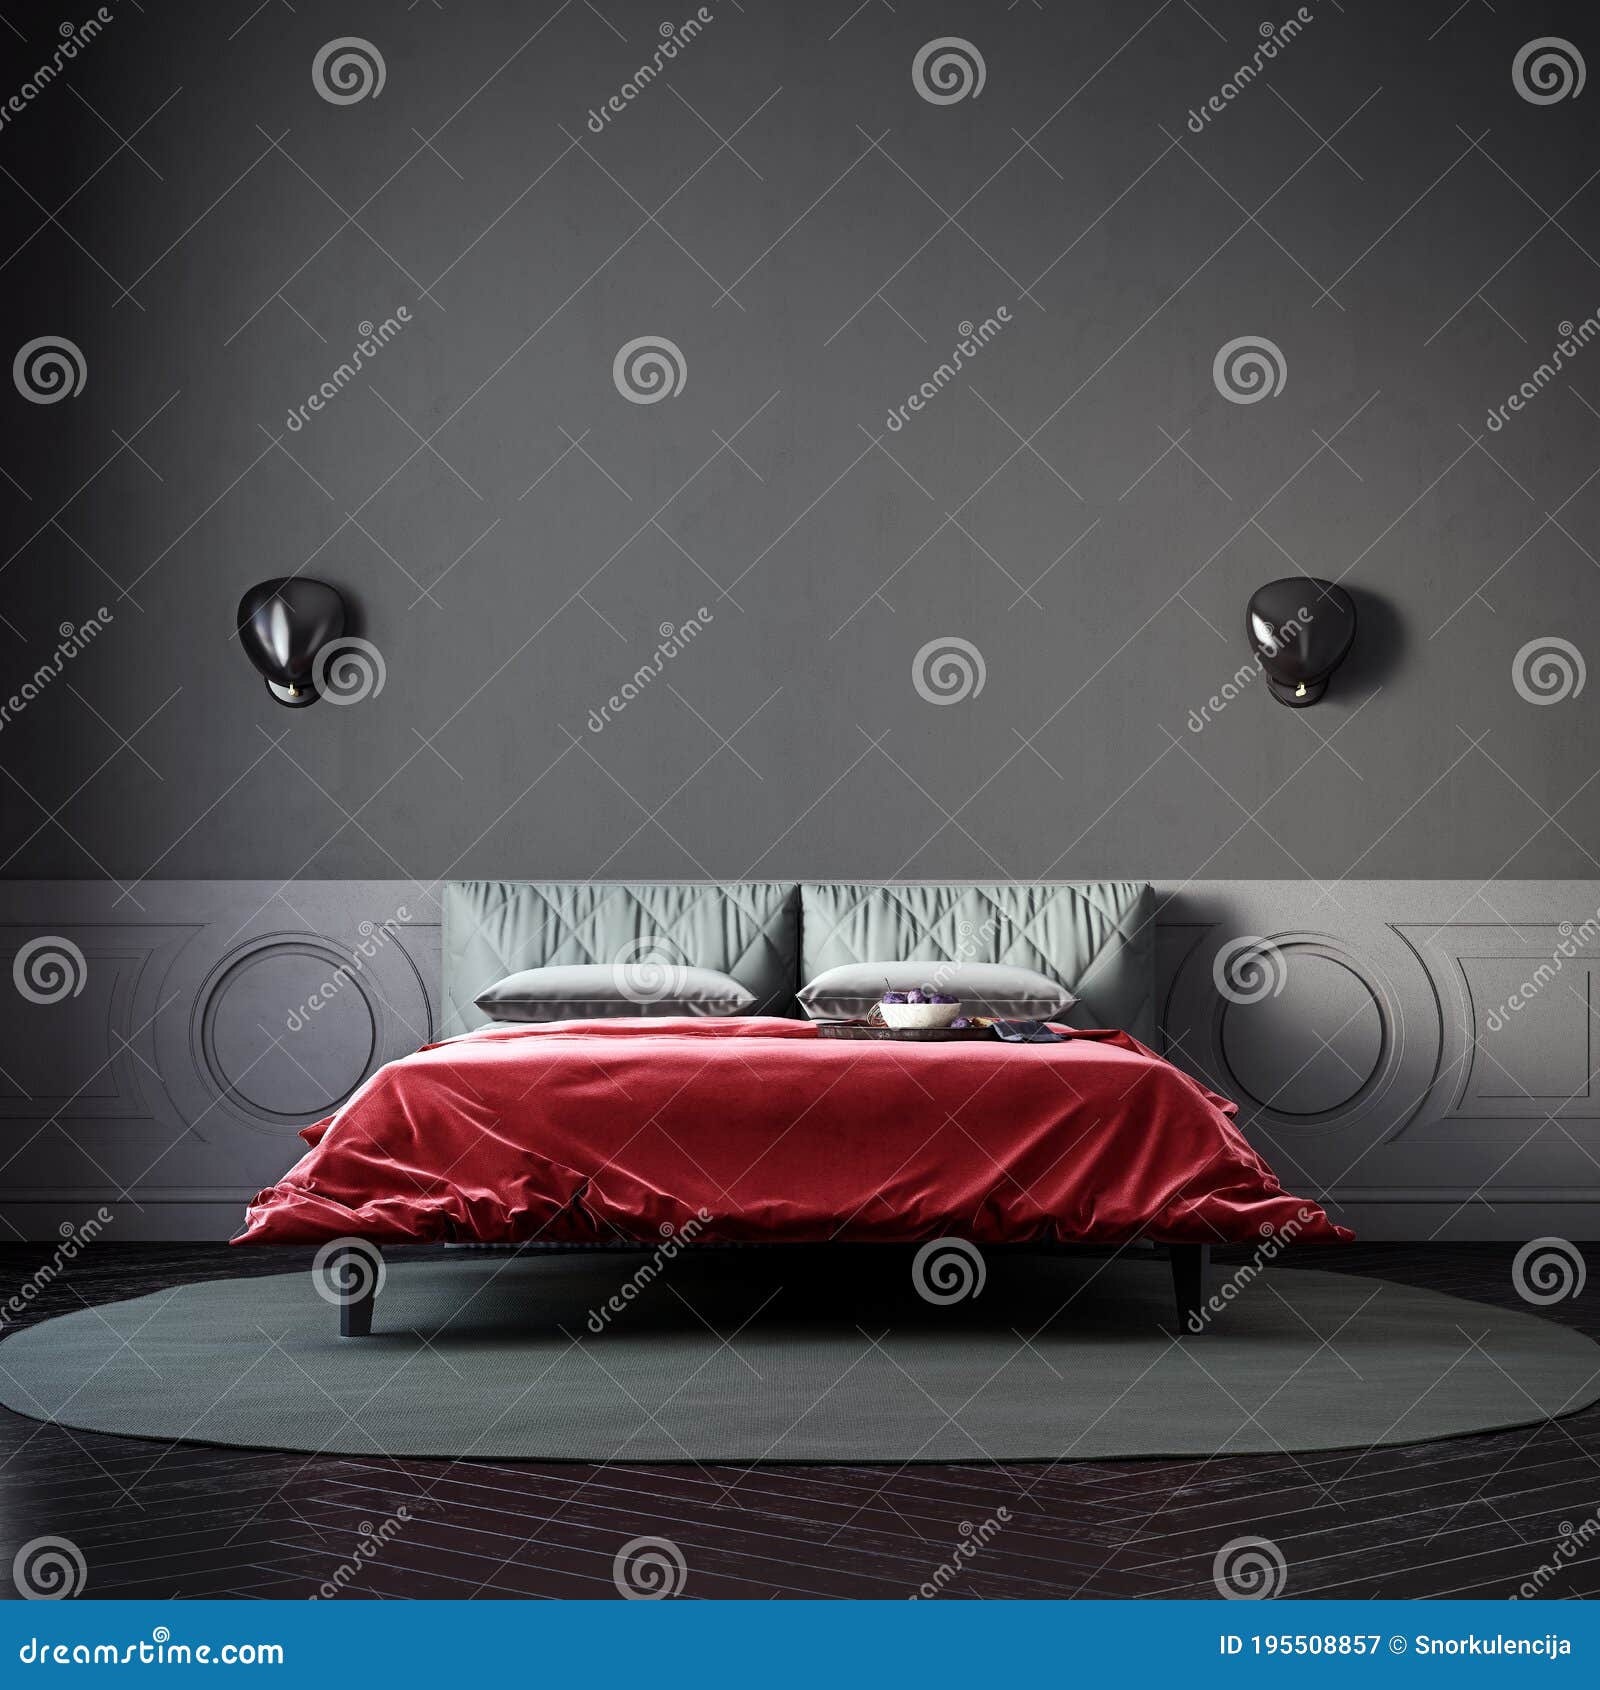 dark gloomy bedroom with vibrant red color bedspread, noir style, mock-up with negative space